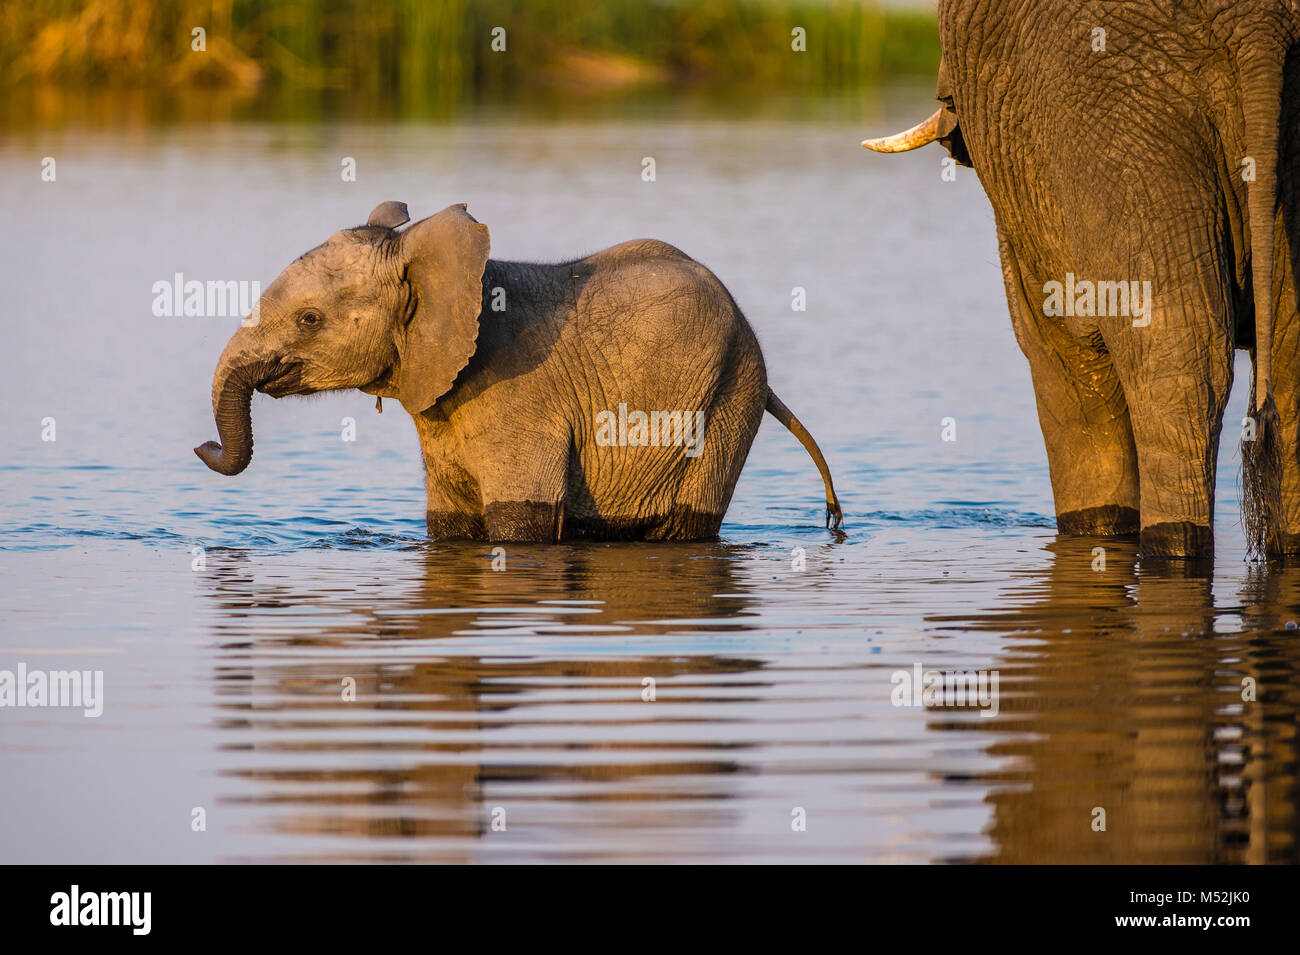 A young elephant calf enjoys playing in a waterhole while its mother drinks alongside. Stock Photo